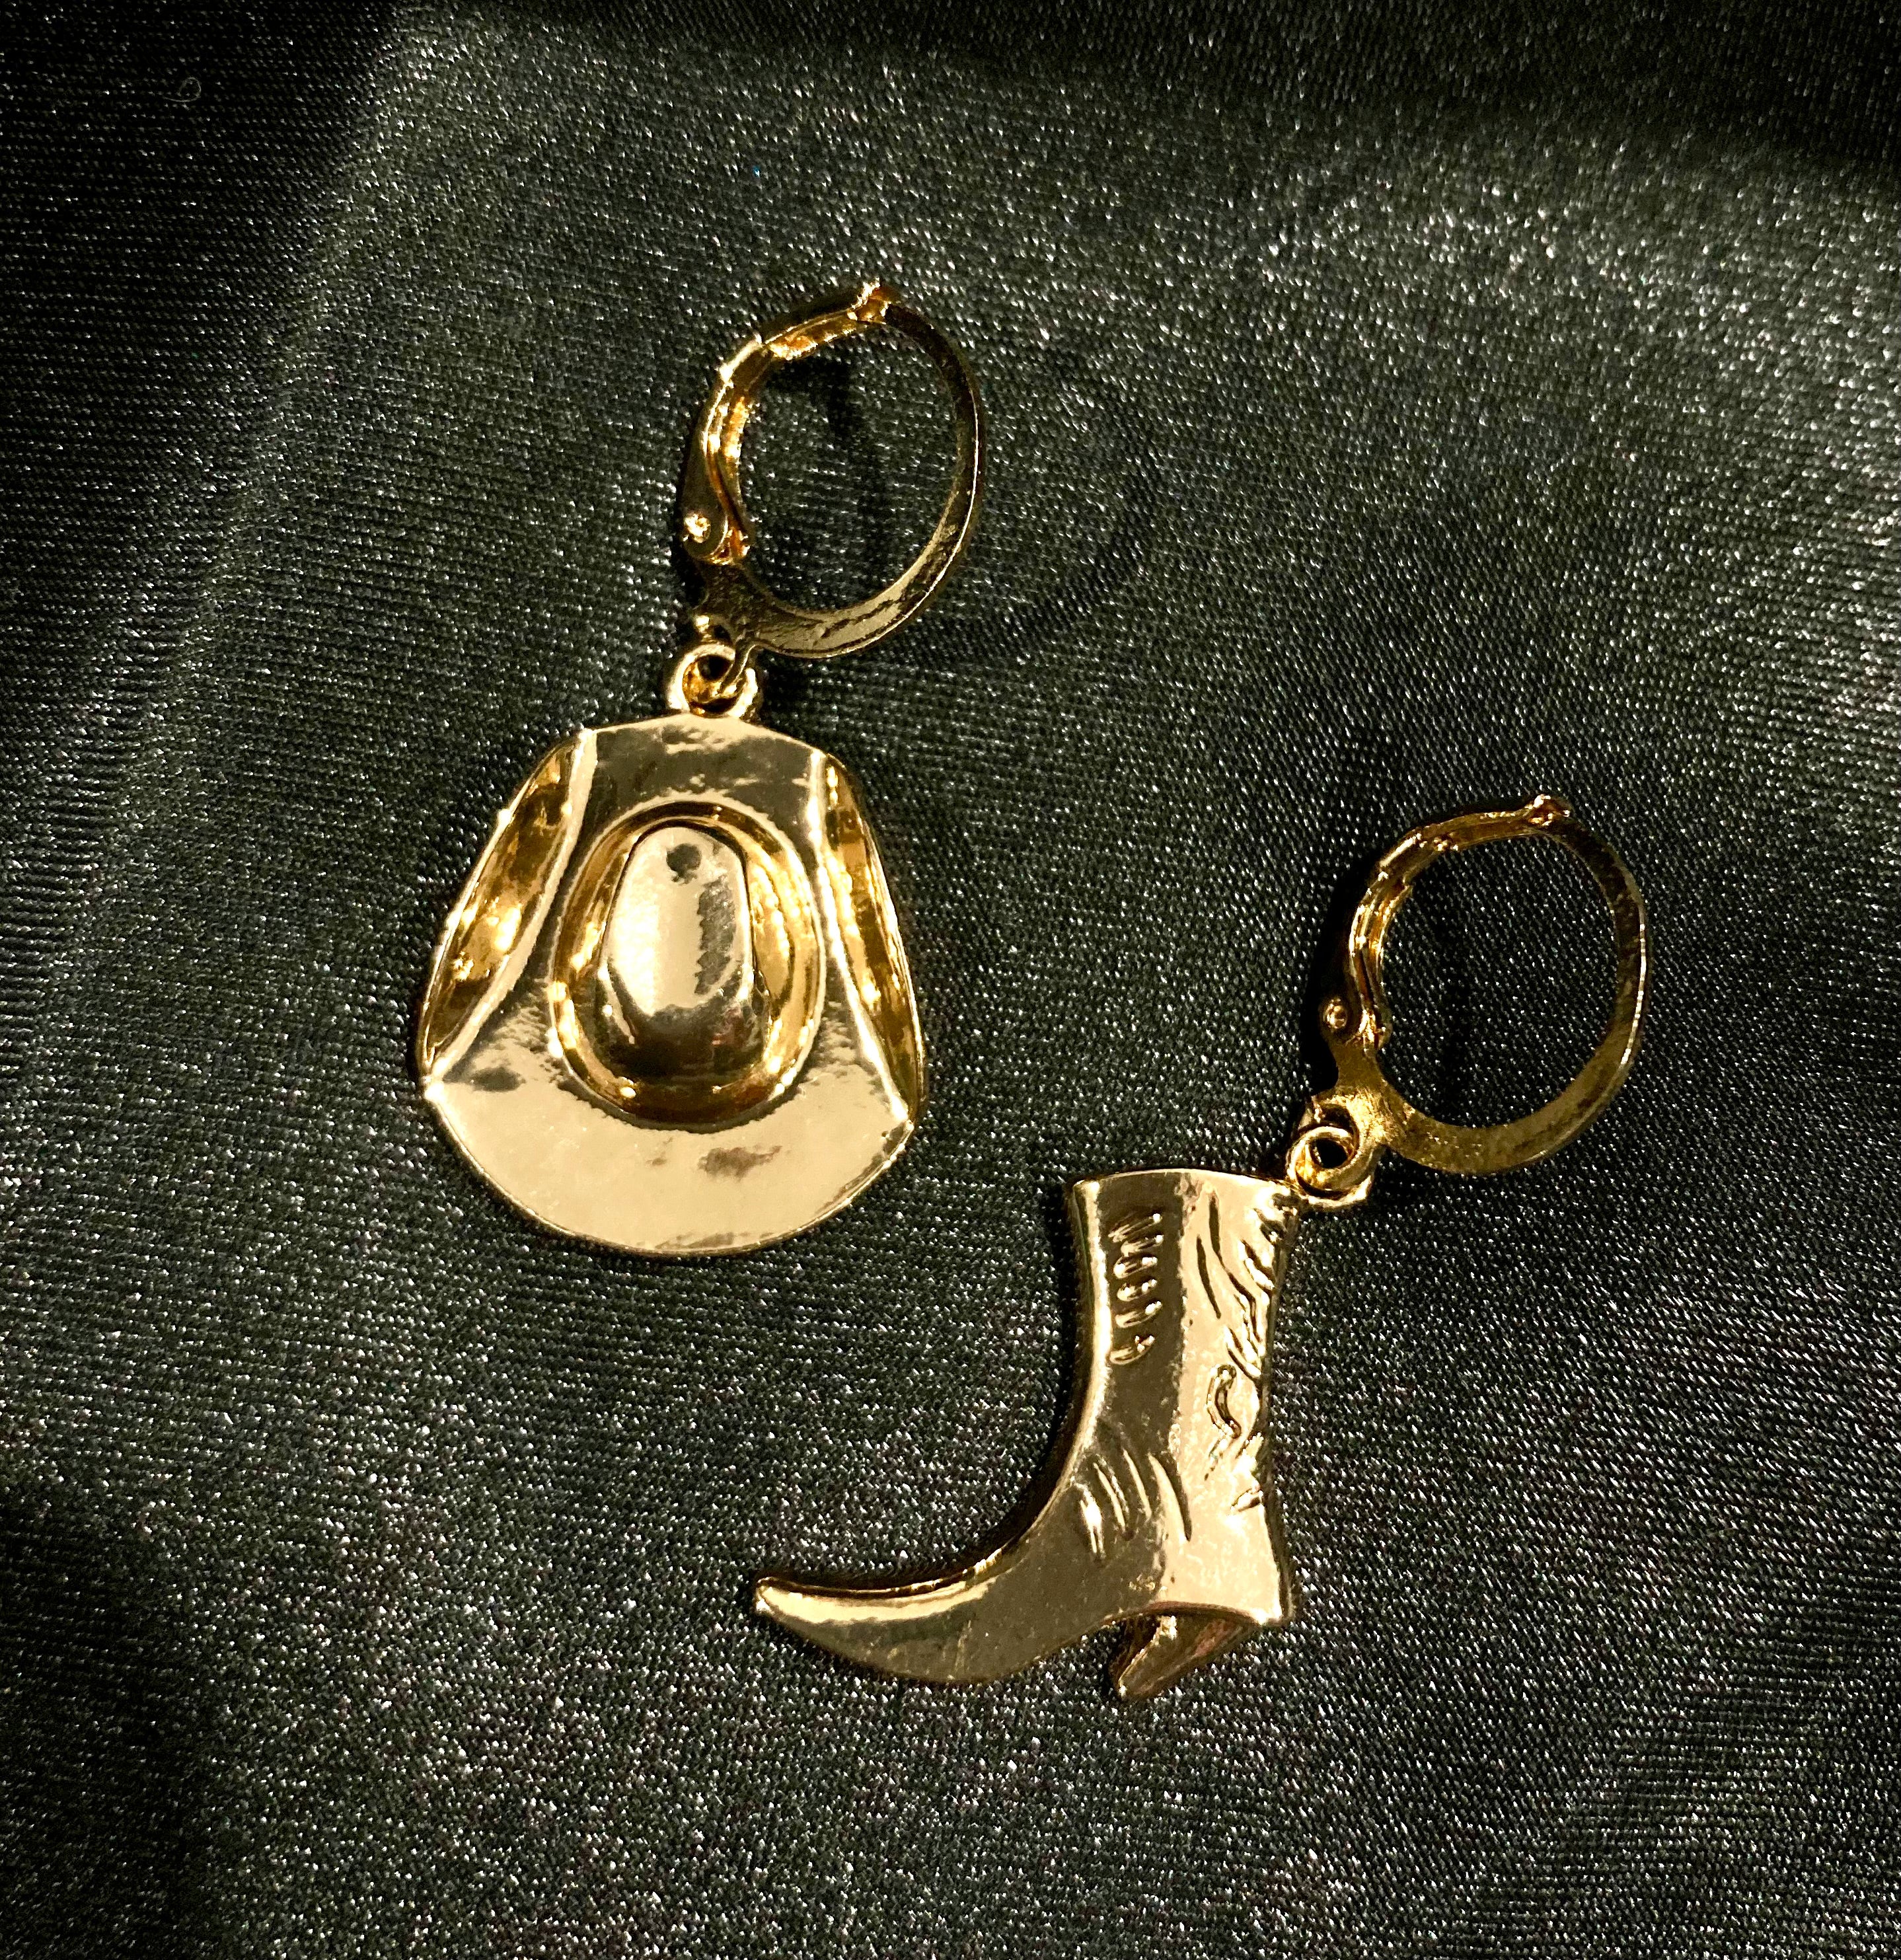 Gold Boot and Hat Earrings